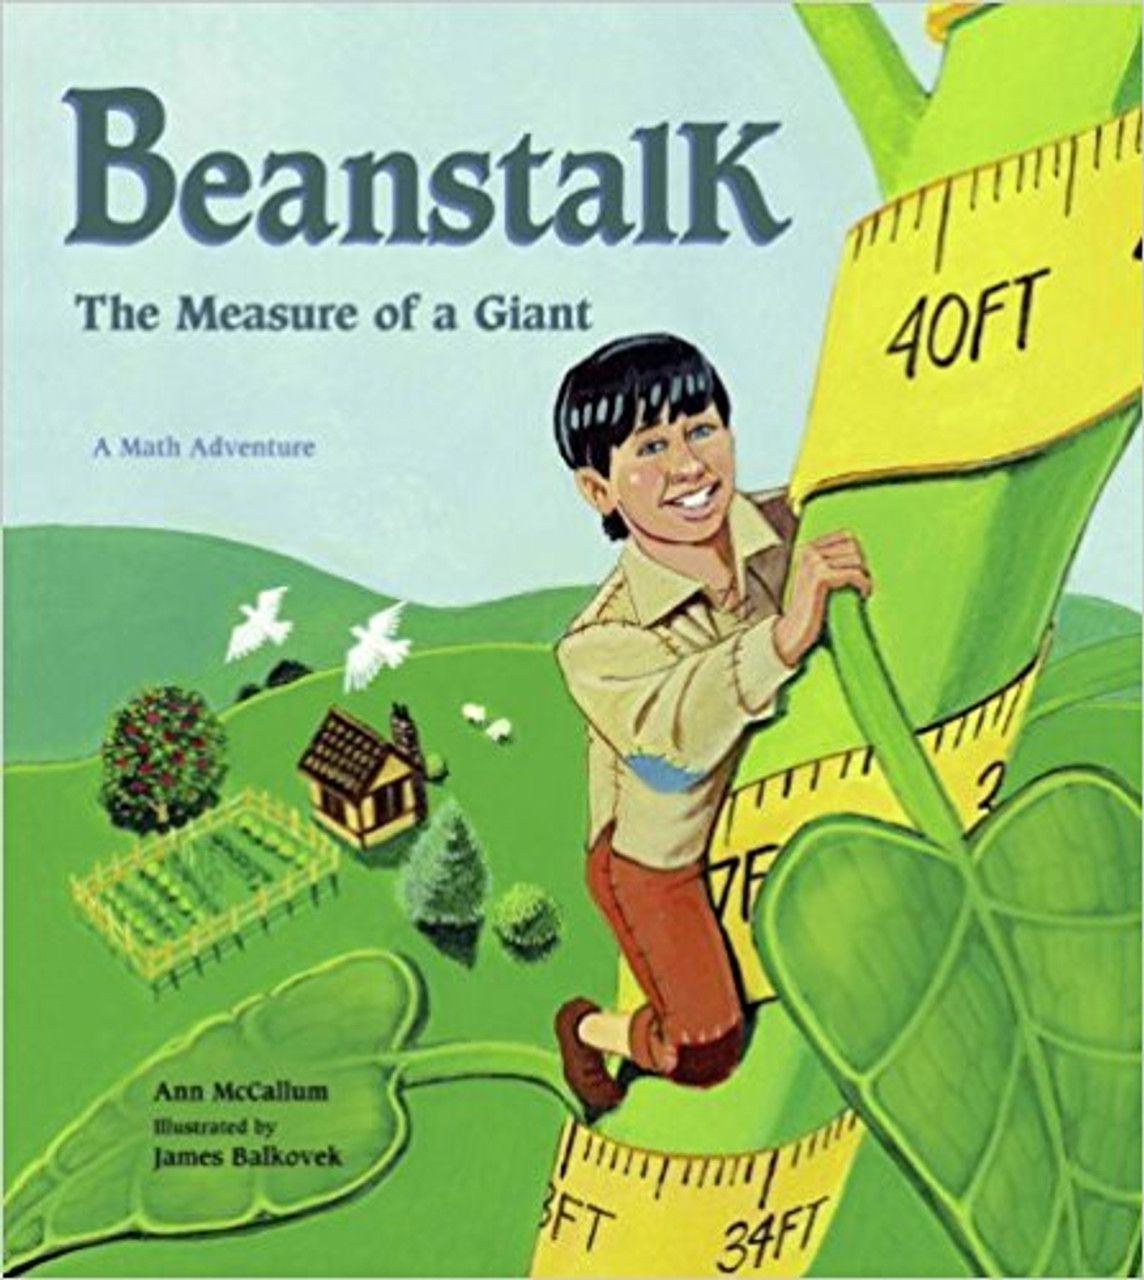 Jack climbs an enormous beanstalk and encounters a very lonely boy giant, and by using ratios and proportion he makes toys that are the right size for each of them.